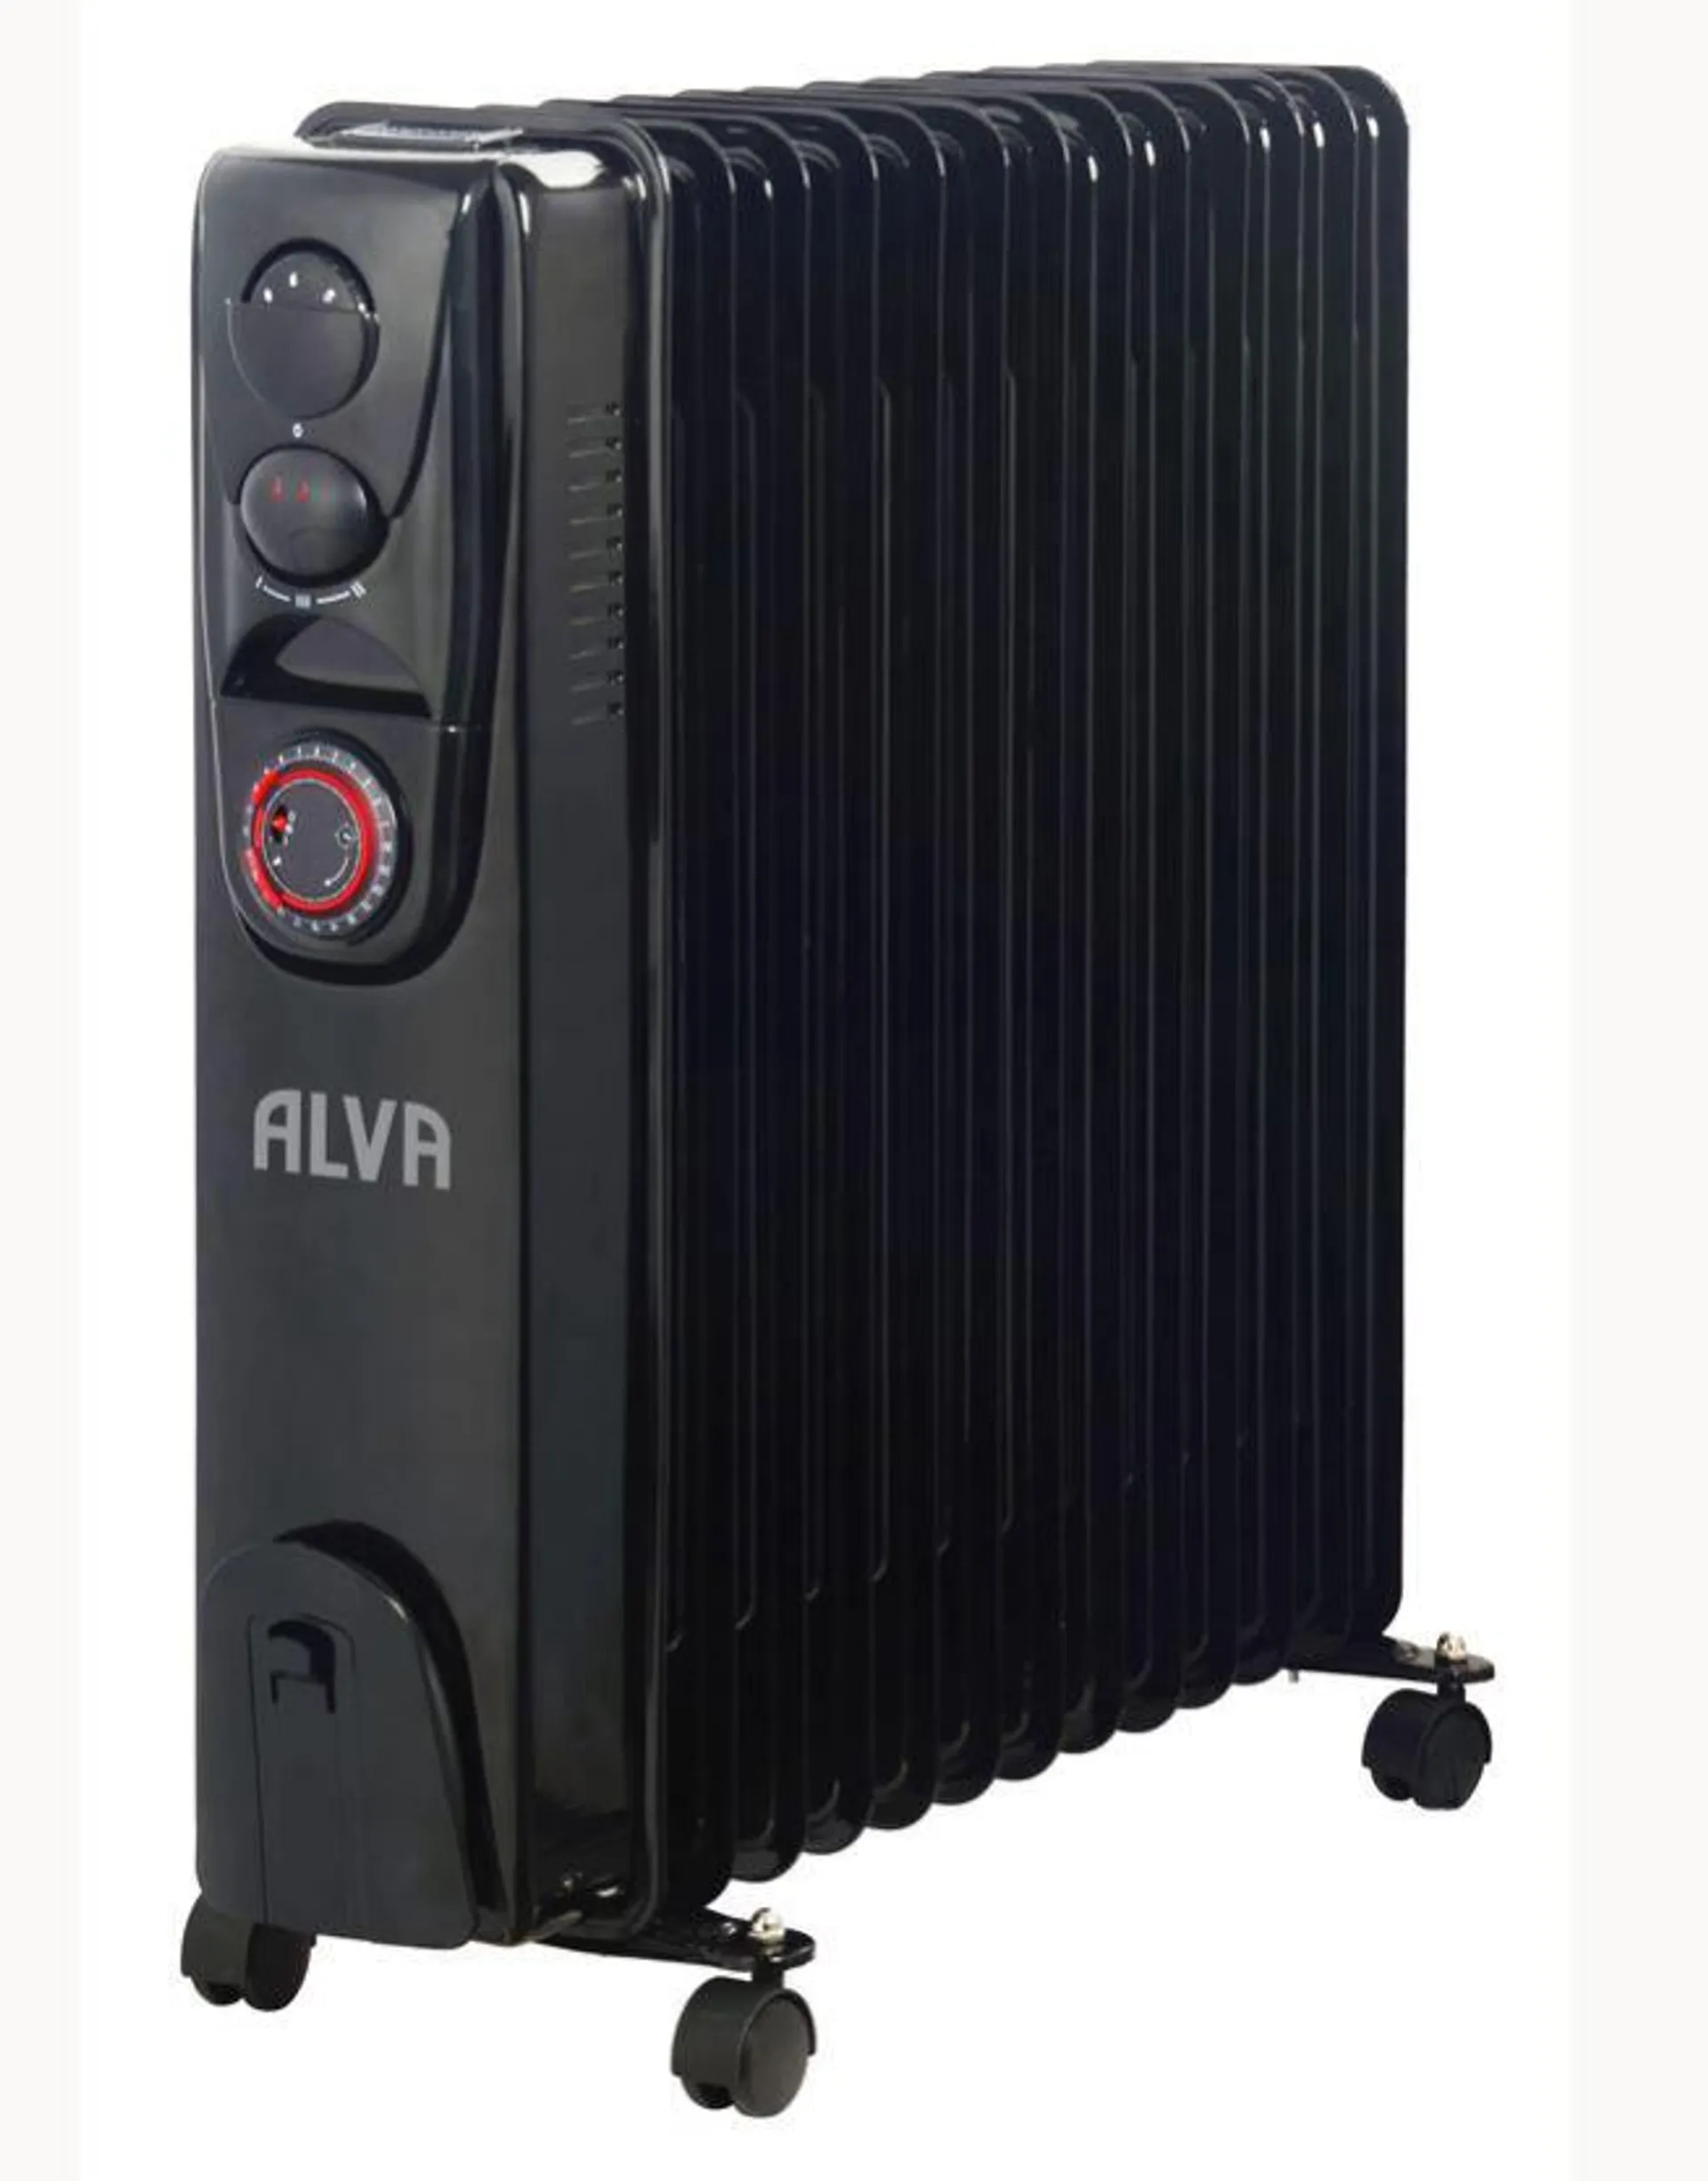 Oil Heater 13 Fin With Timer Function ALVA 2500W